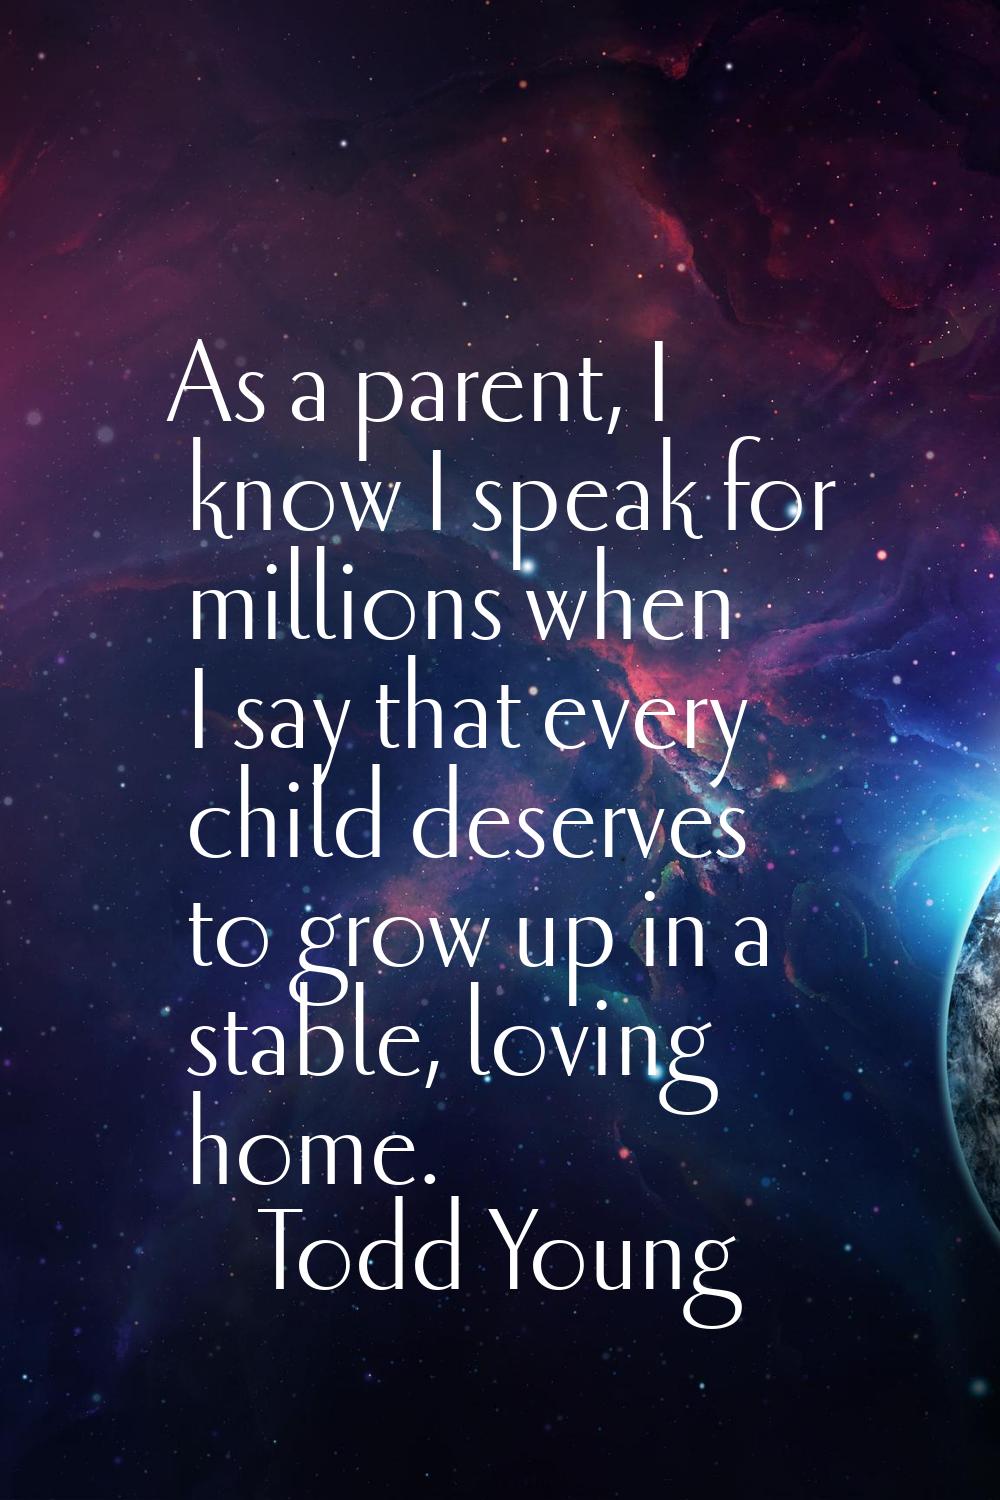 As a parent, I know I speak for millions when I say that every child deserves to grow up in a stabl